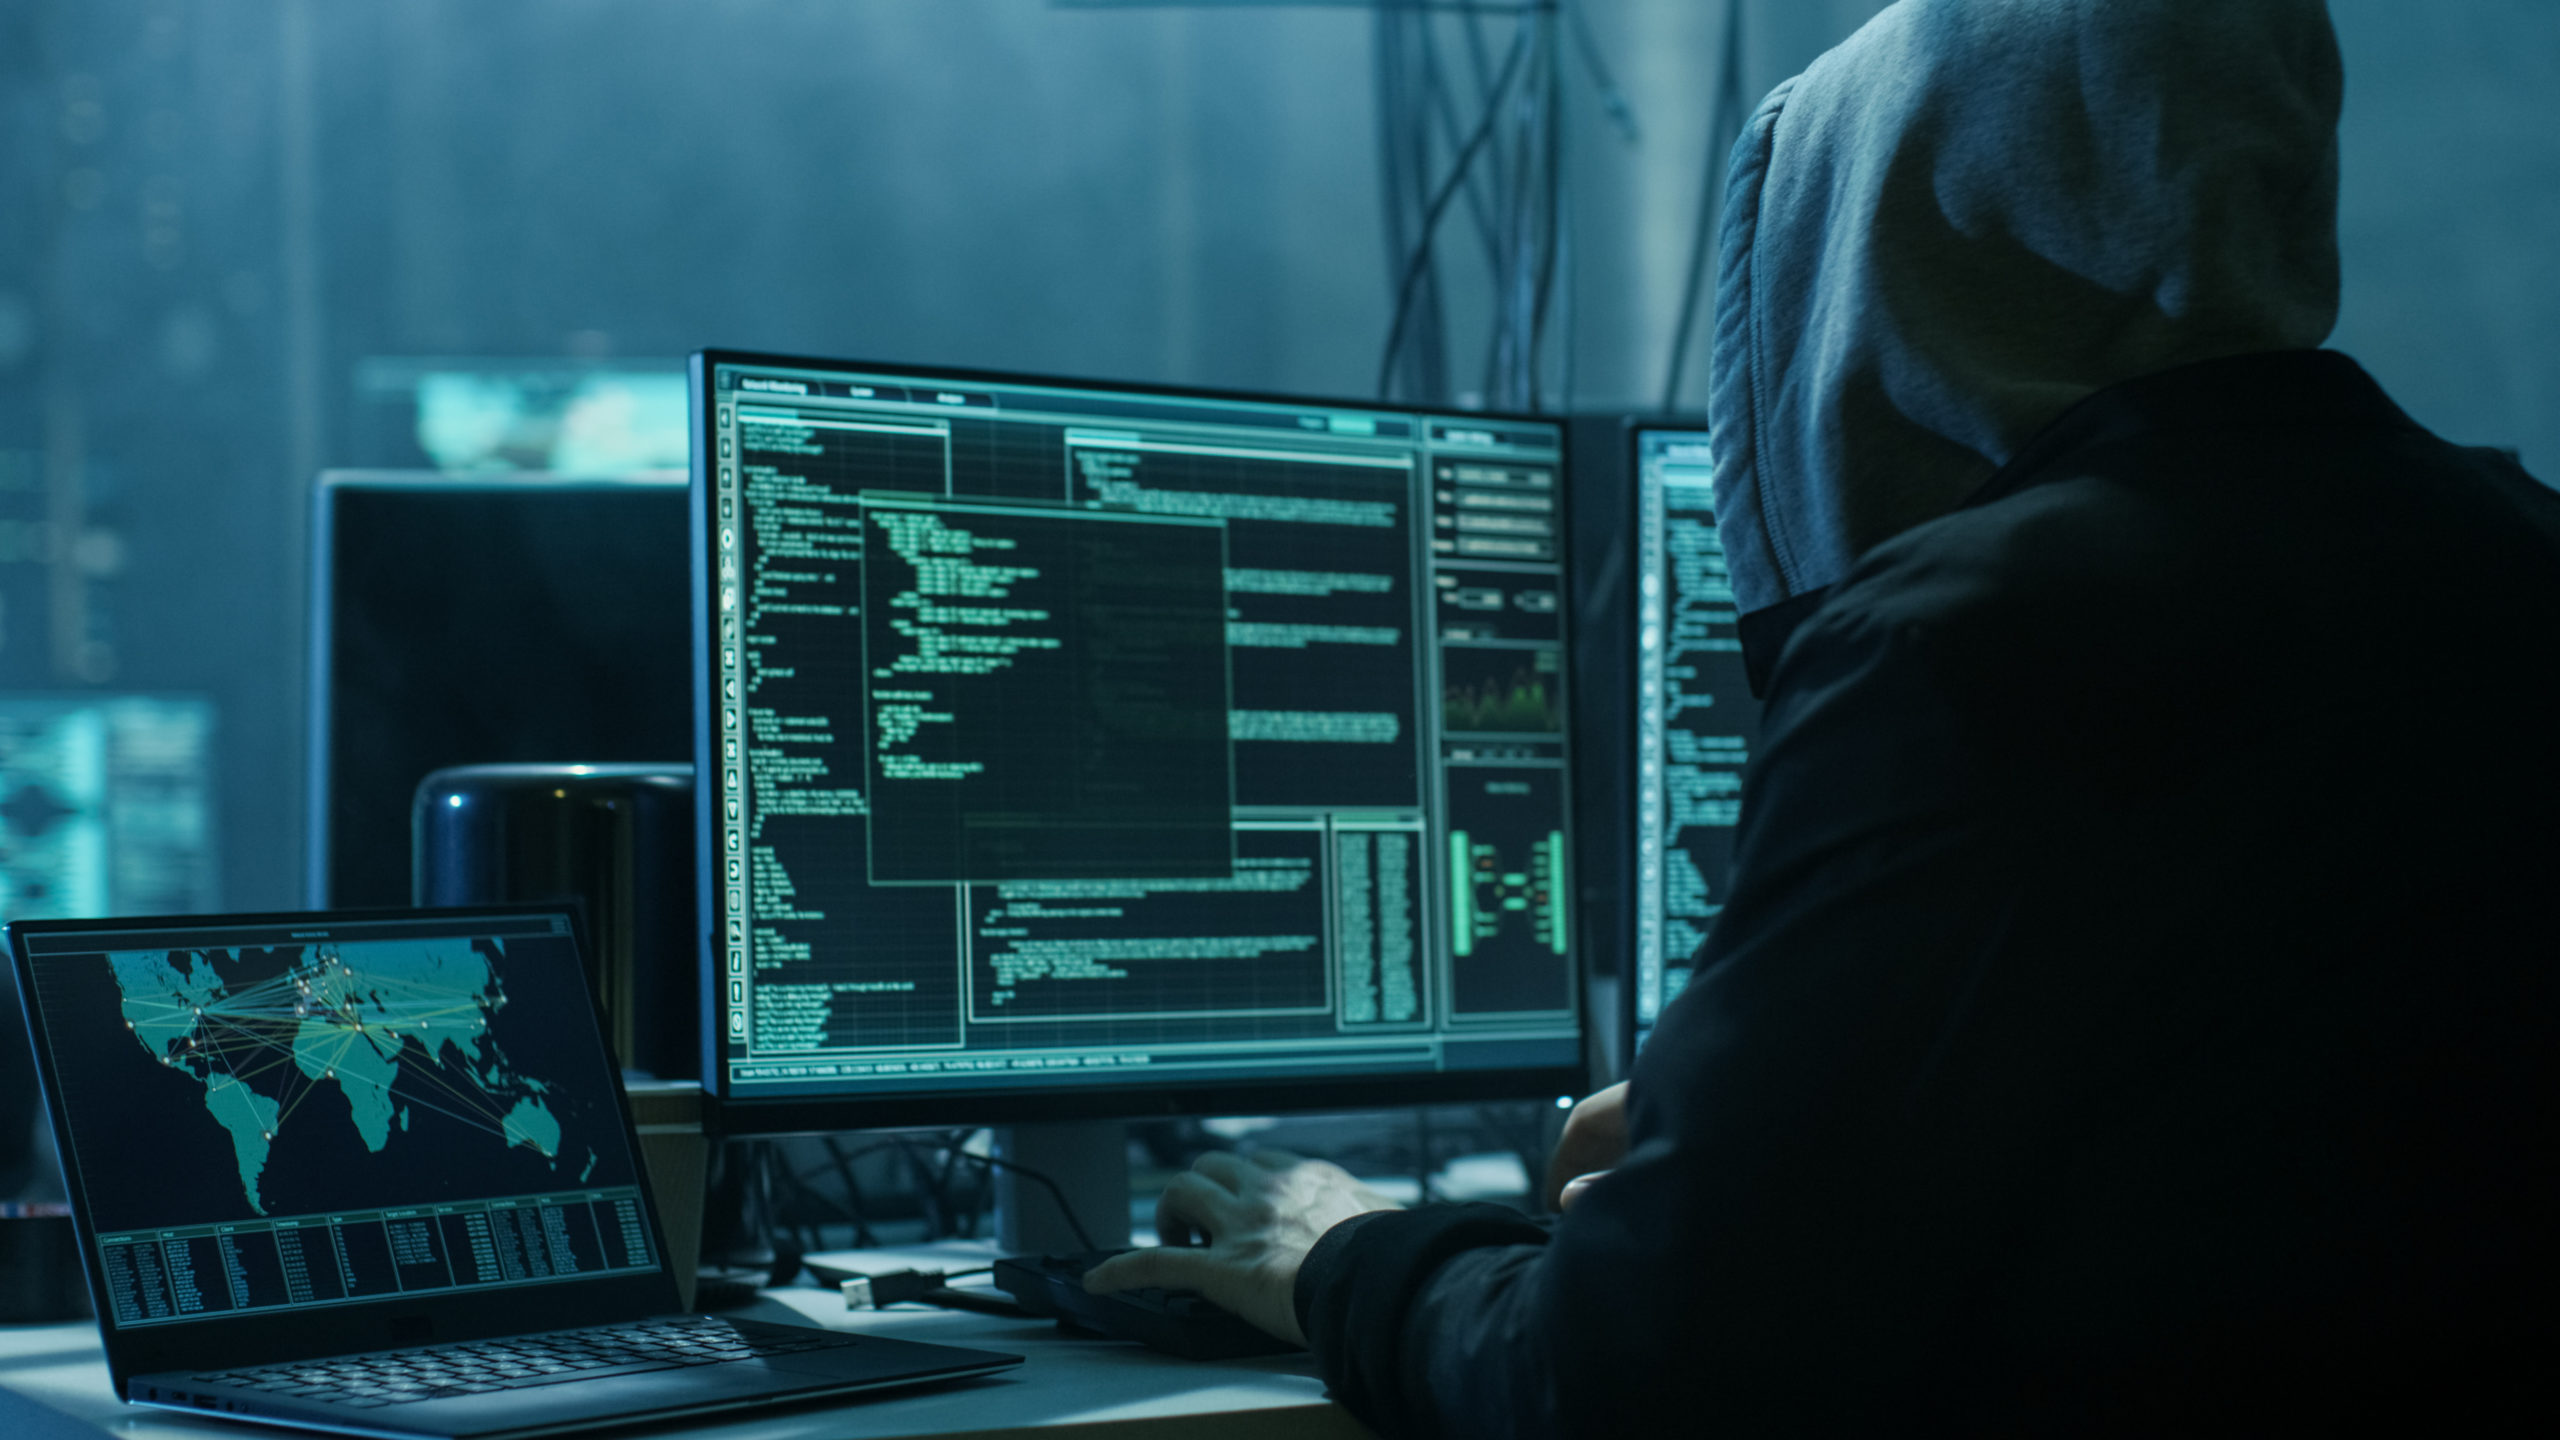 Hooded hacker in a dim, atmospheric warehouse. in front of multiple monitors and laptops attempting a data breach.